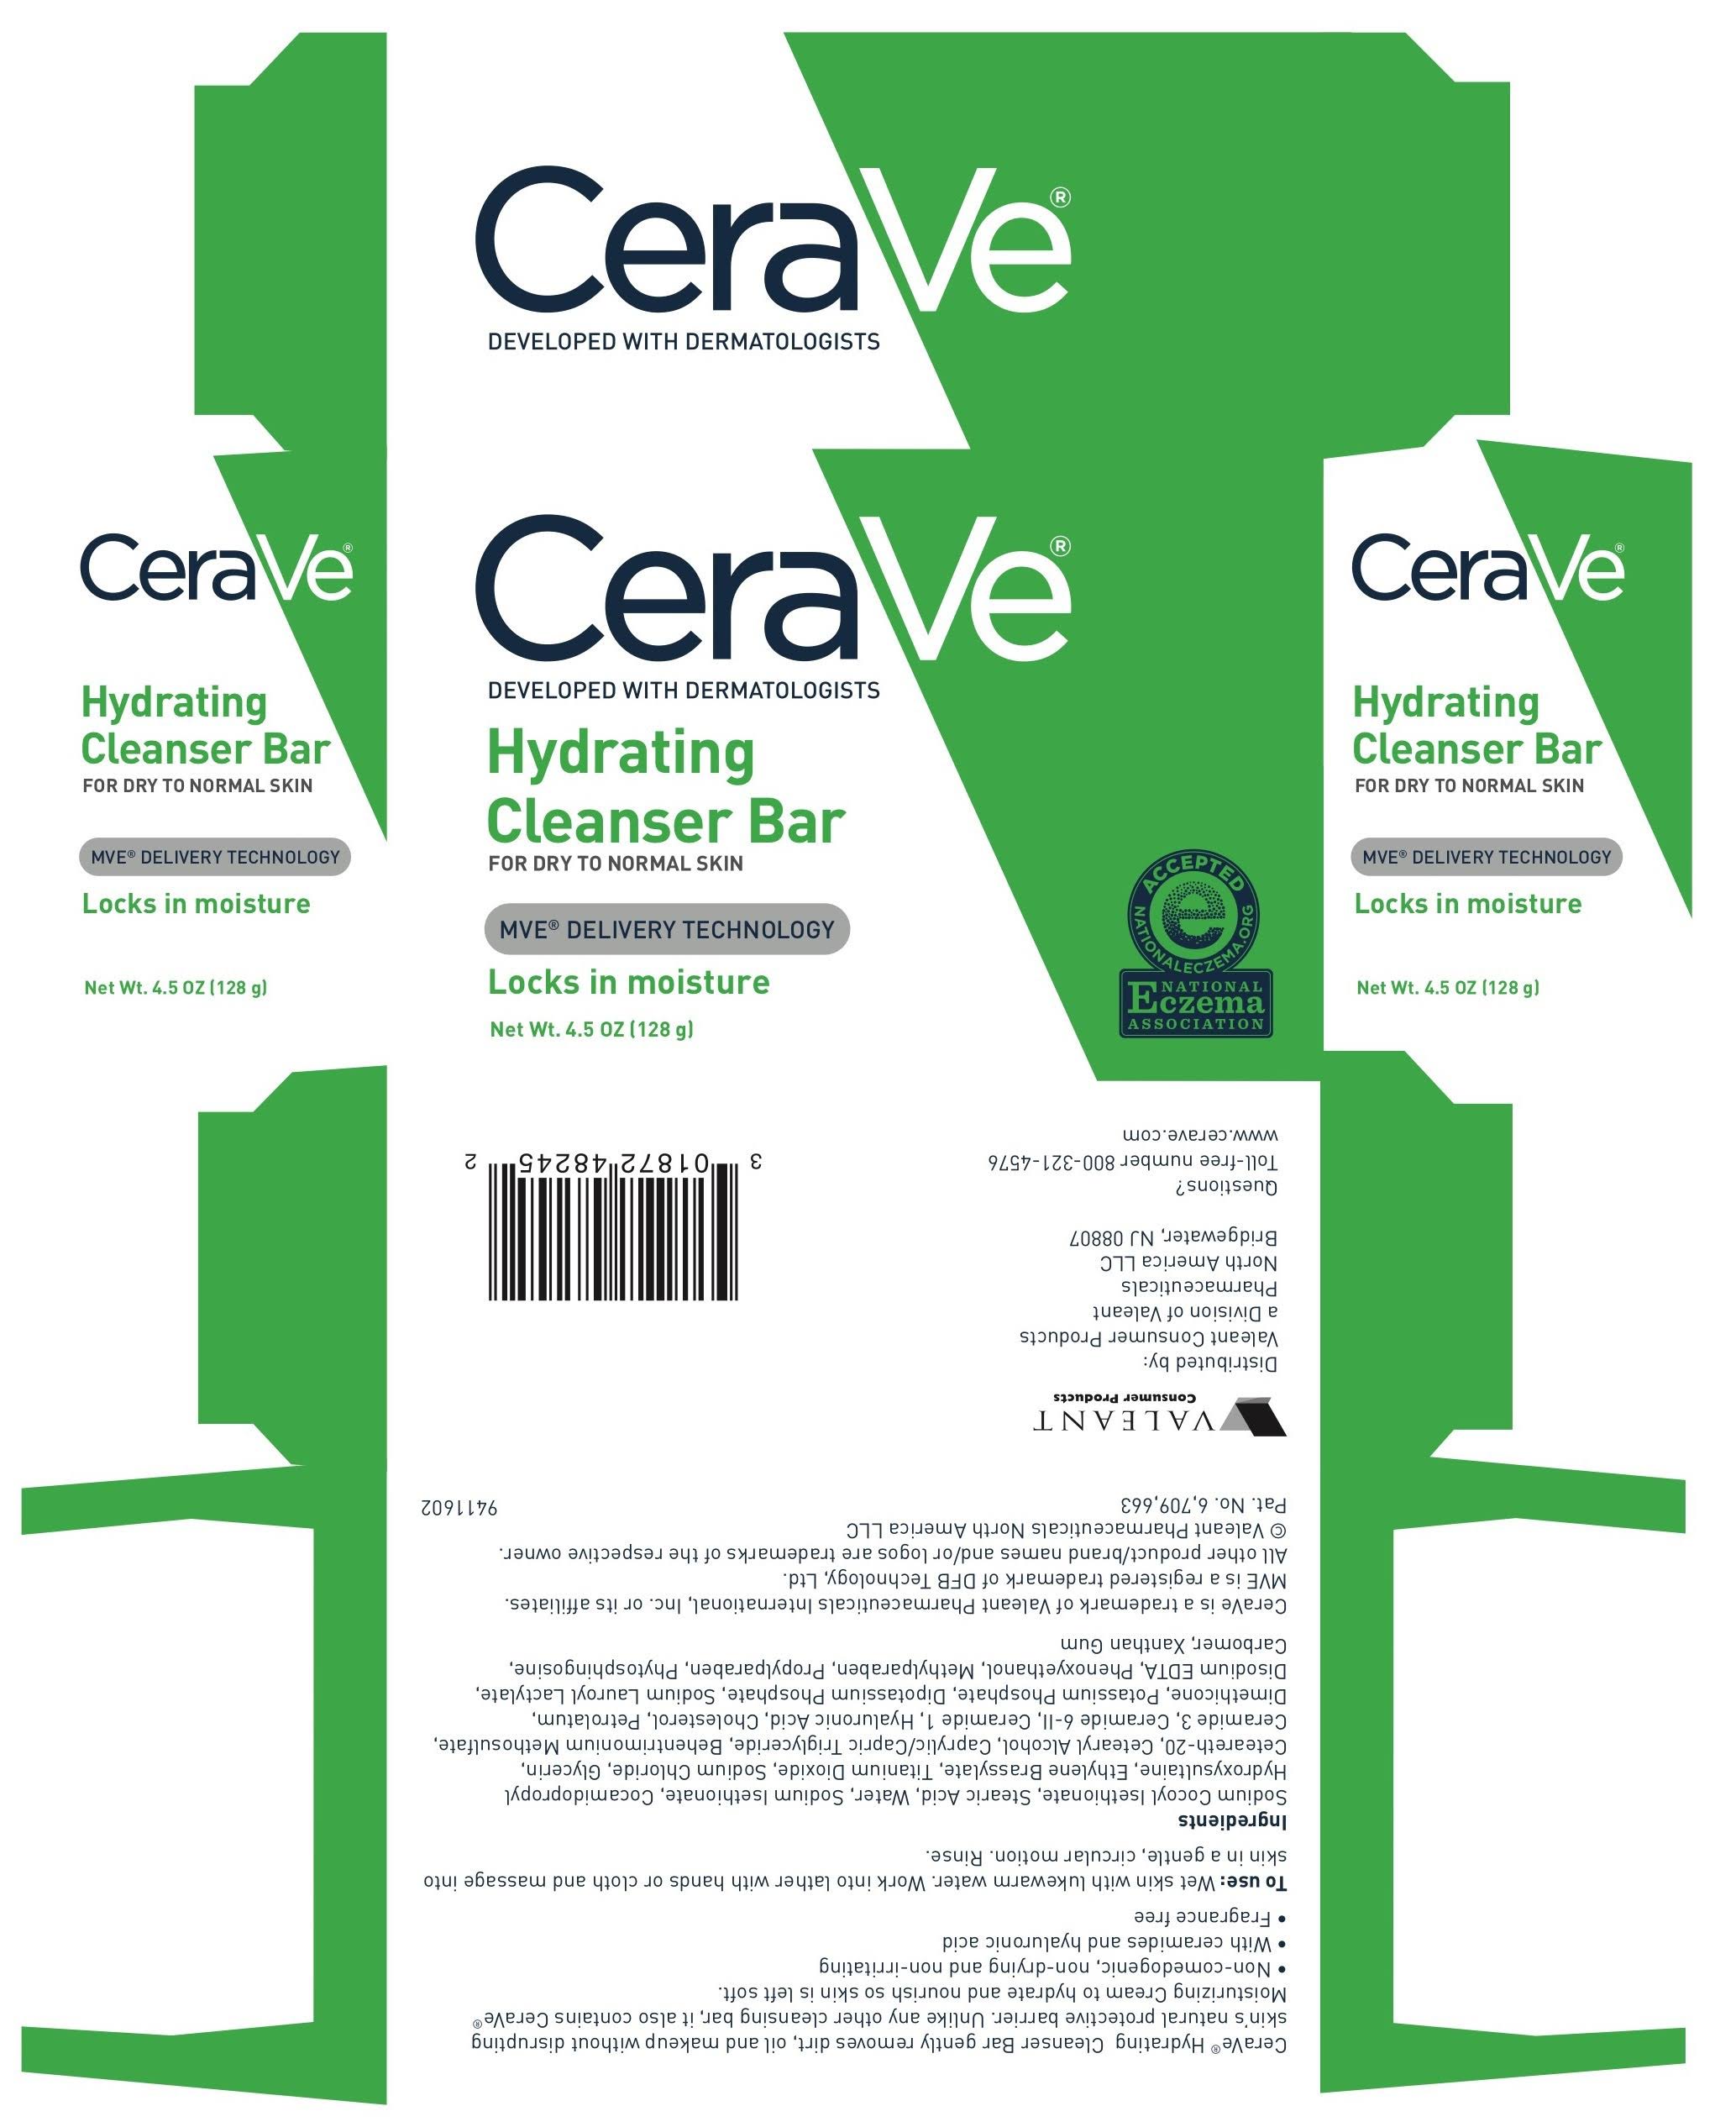 Cerave Hydrating Cleanser Bar - 4.5oz, for Dry to Normal Skin